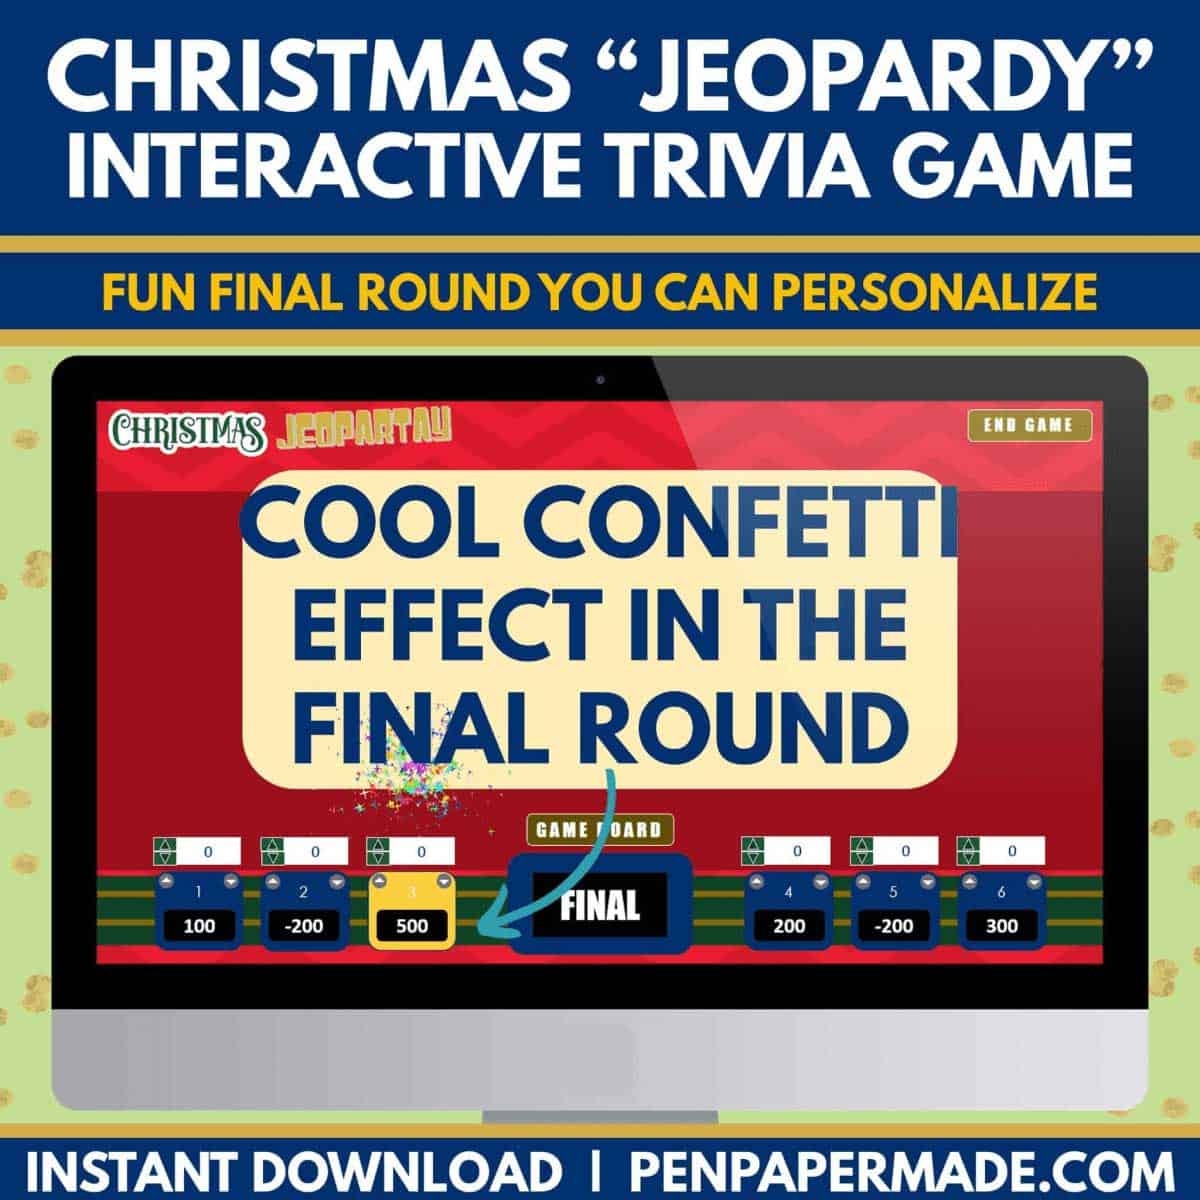 final round in christmas jeopardy includes confetti to celebrate the winning team.